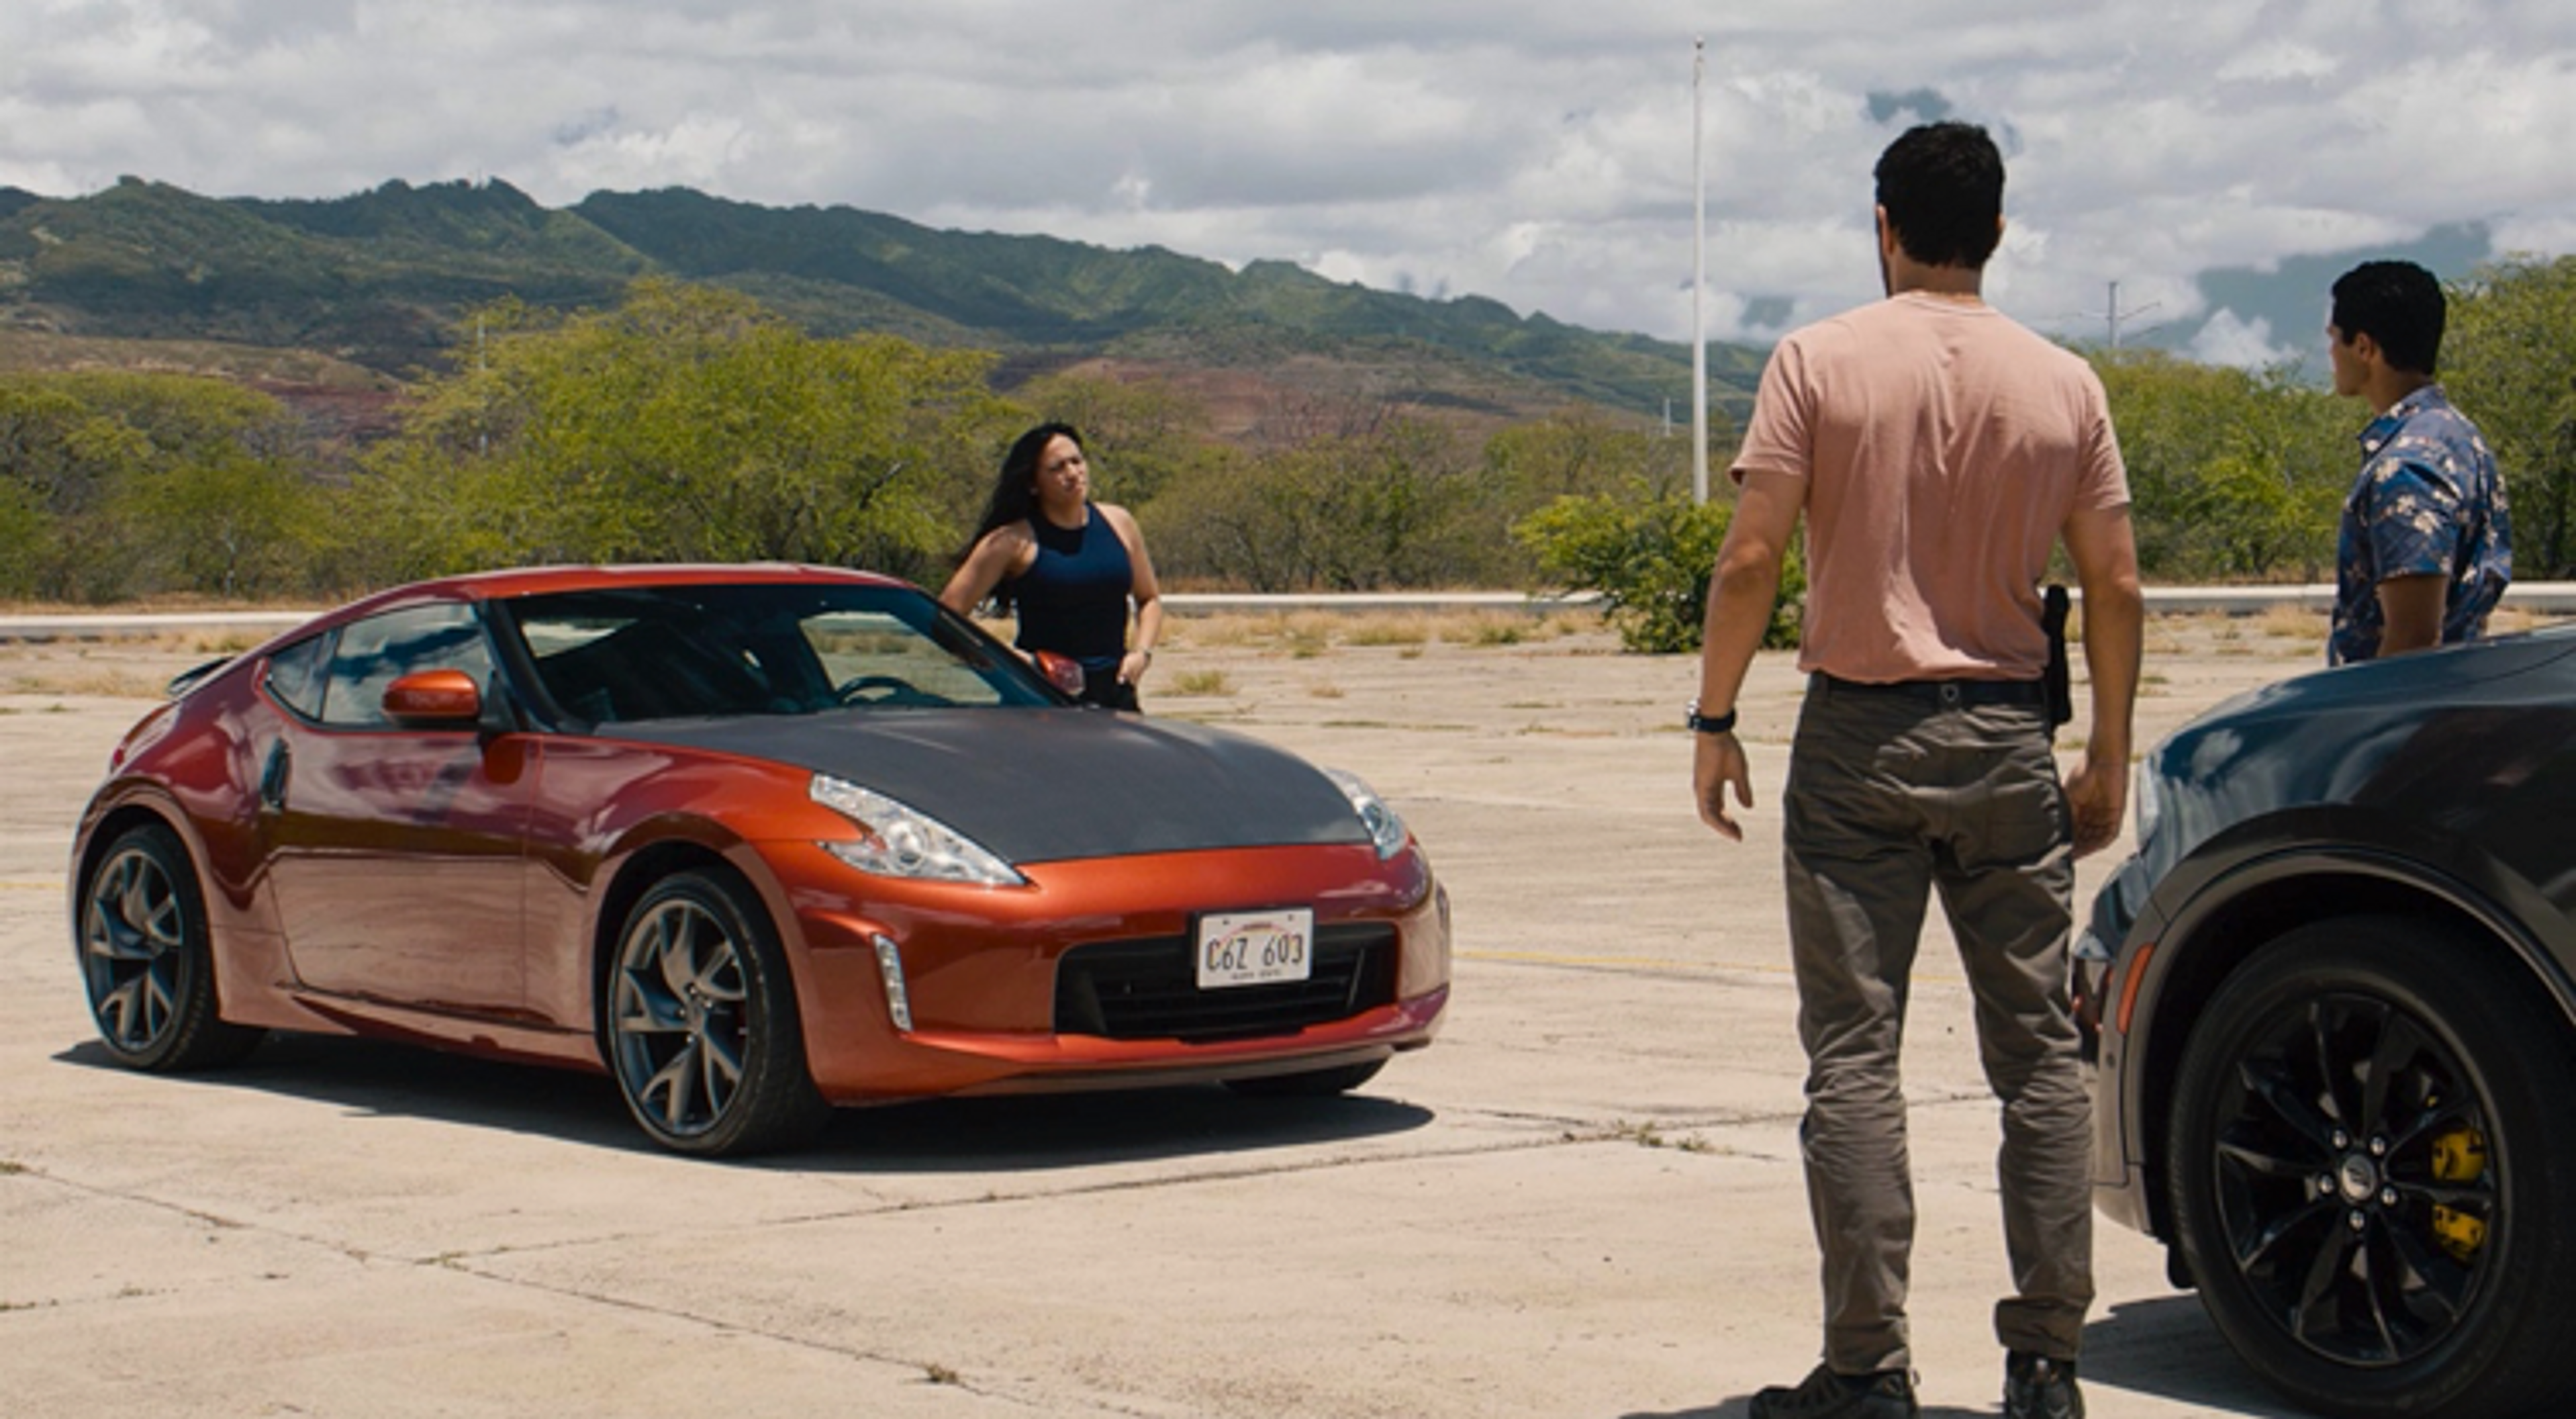 A shot on the set of NCIS. A woman is standing next to an orange Nissan Skyline with a carbon fiber hood while talking to two men who are standing next to a black vehicle.